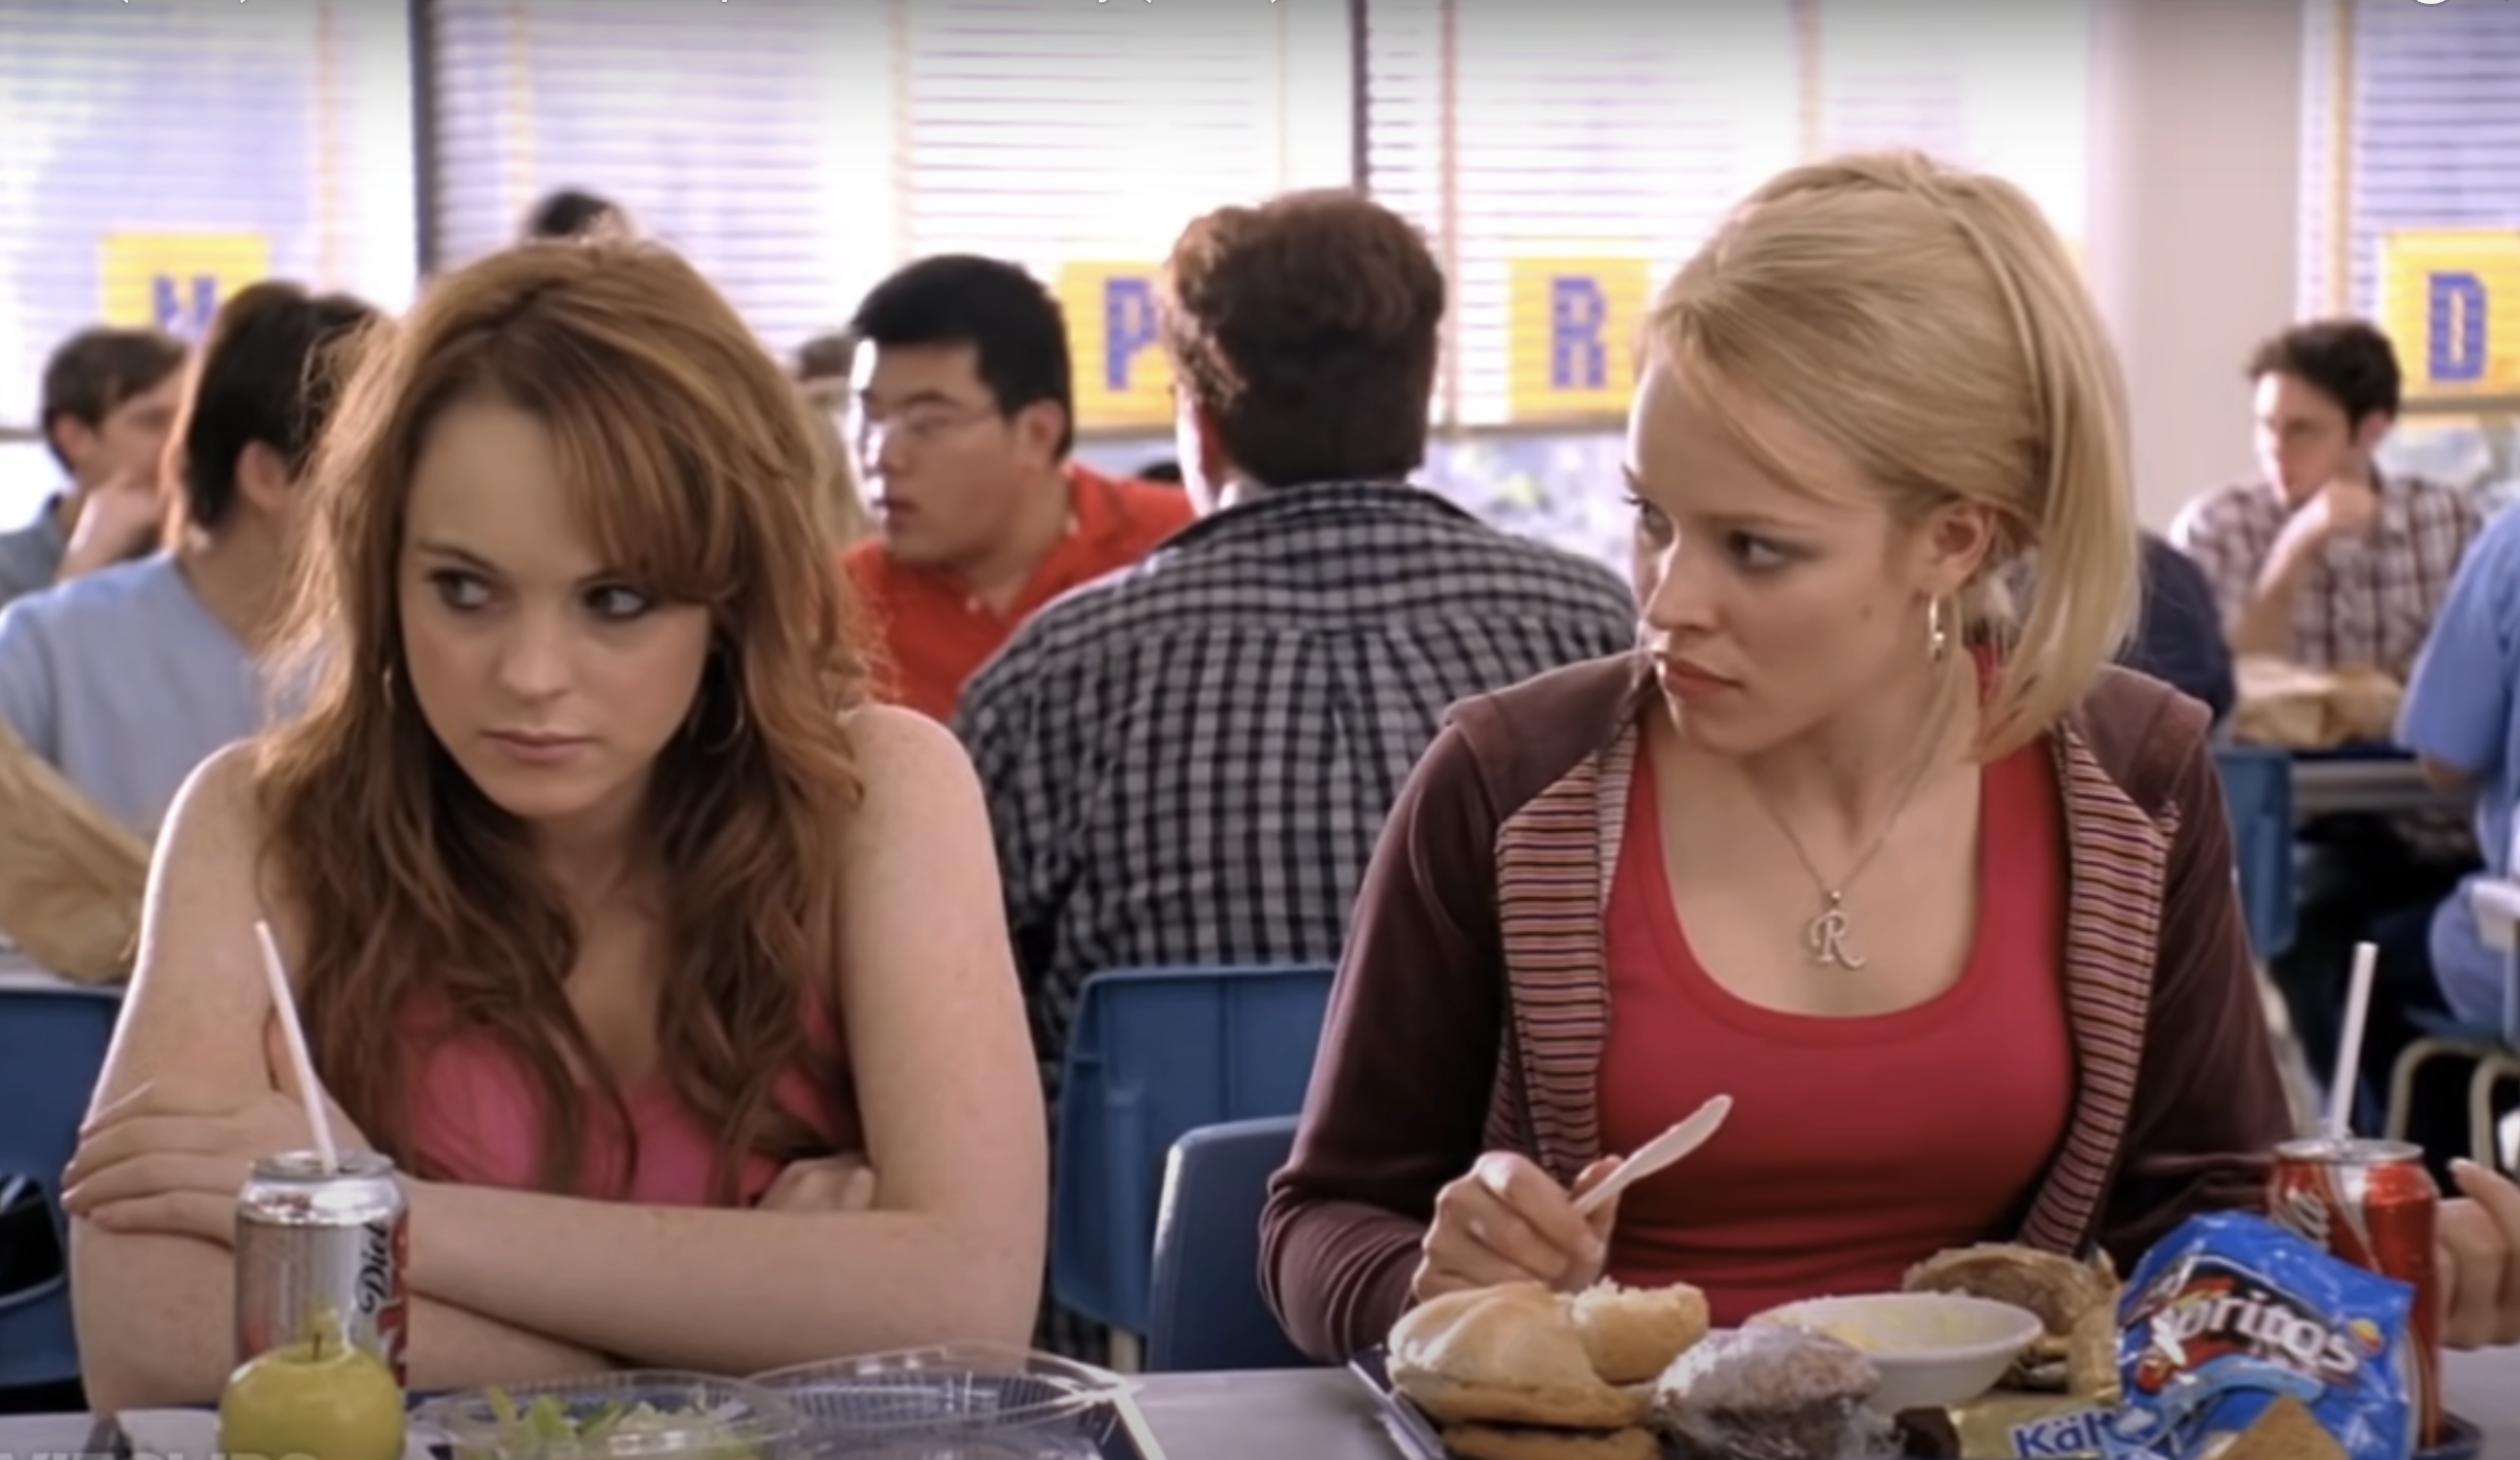 Apparently, Rachel McAdams Didn’t Know That ‘Everyone’ Participated in the ‘Mean Girls’ Reunion